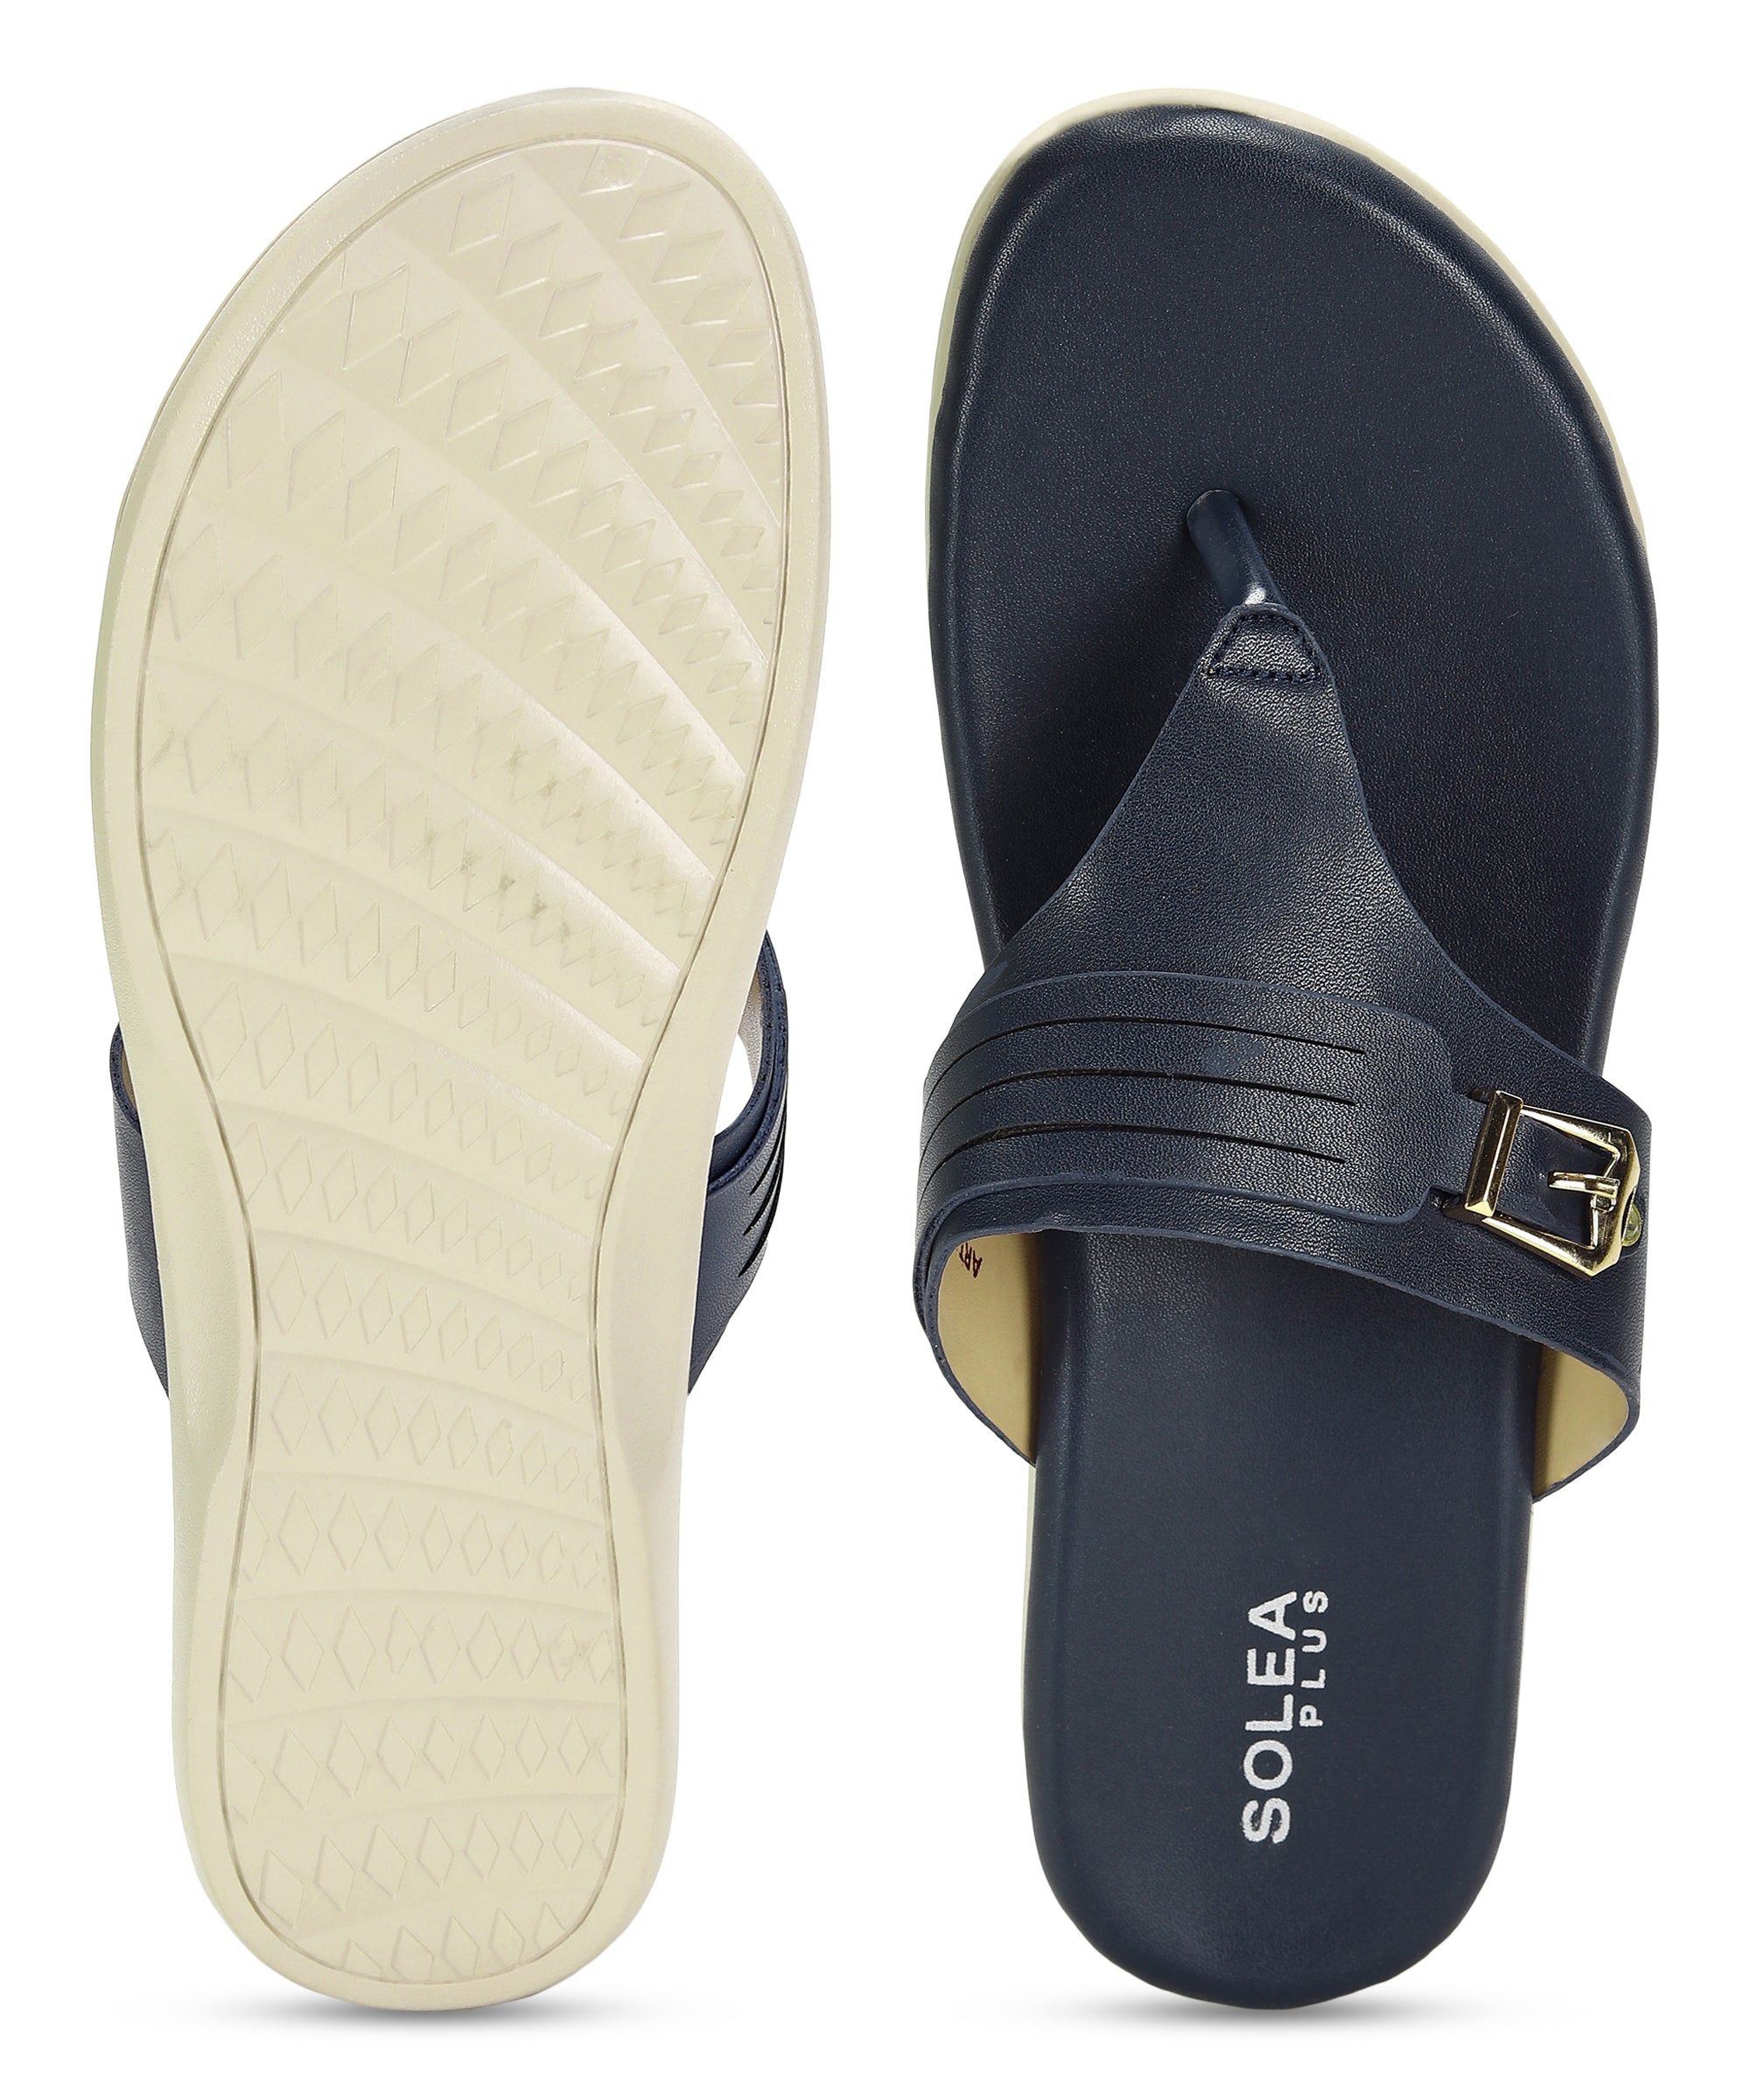 Paragon RK6029L Women Sandals | Casual &amp; Formal Sandals | Stylish, Comfortable &amp; Durable | For Daily &amp; Occasion Wear